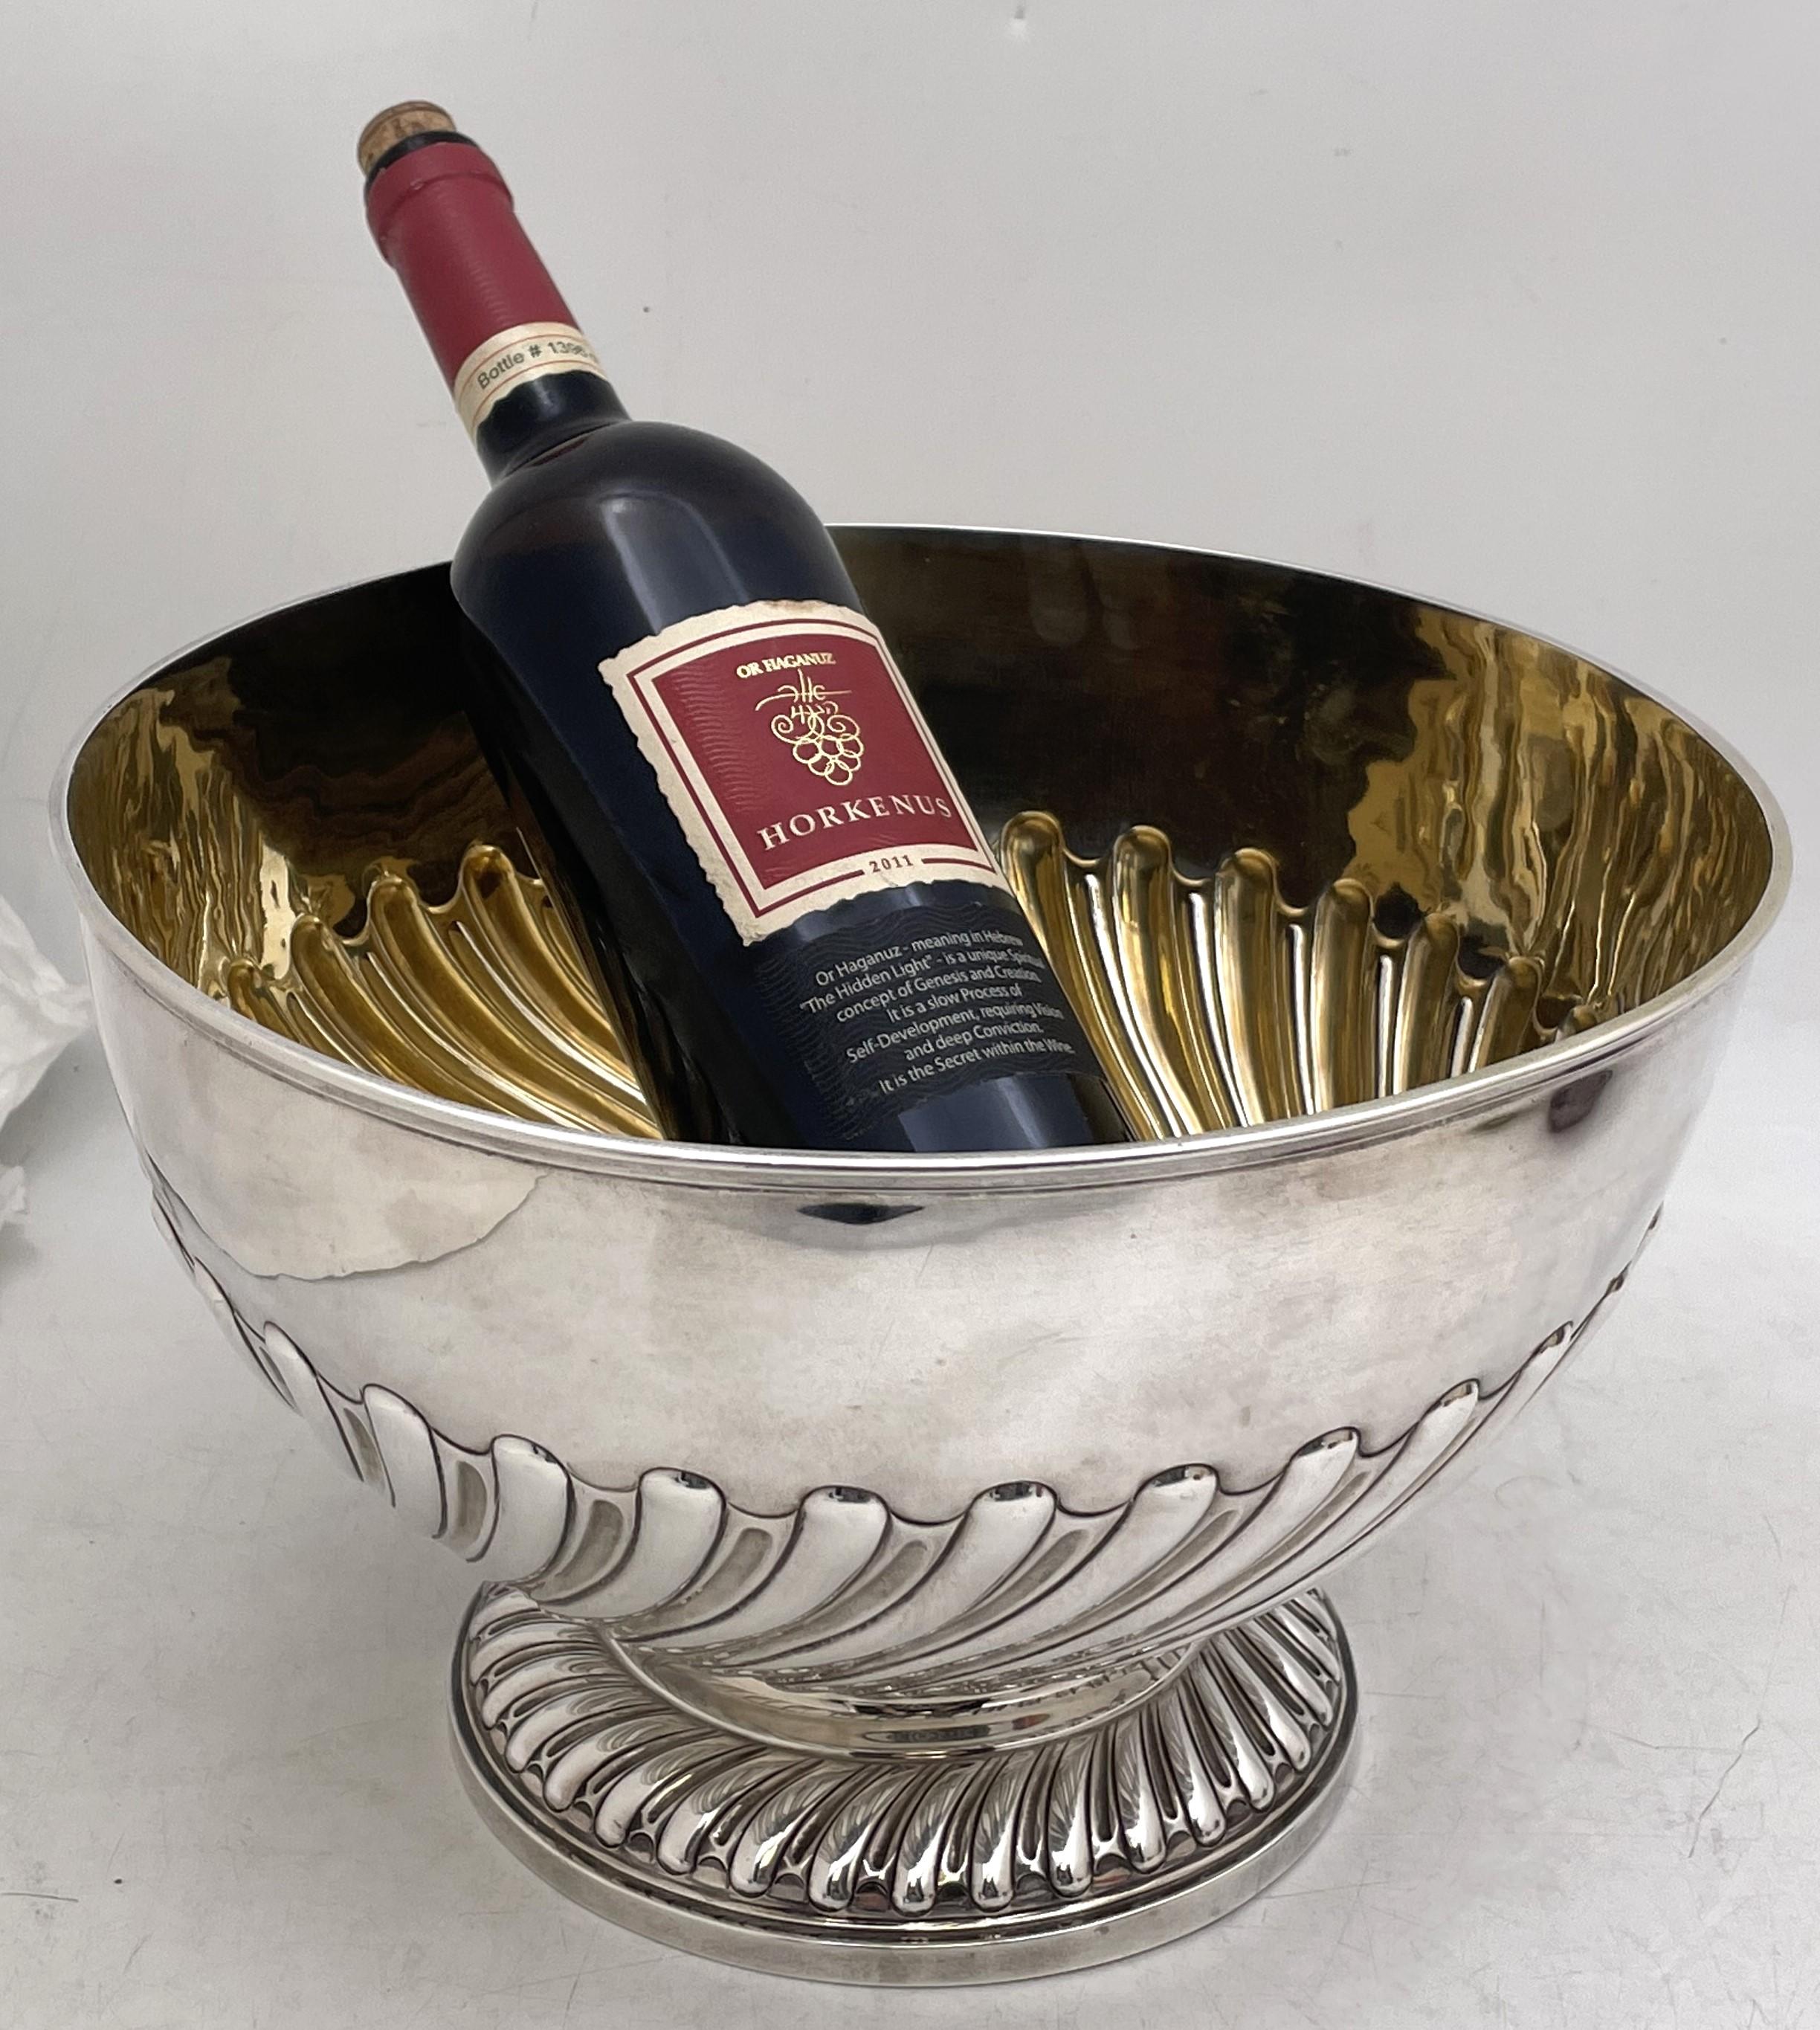 Walter and John Barnard sterling silver punch bowl or wine cooler, with curvilinear, fluted motifs adorning the base and body, gilt inside, from 1892 (Victorian era). It measures 11 1/2'' diameter by 8'' in height, weighs 33.7 troy ounces, and bears